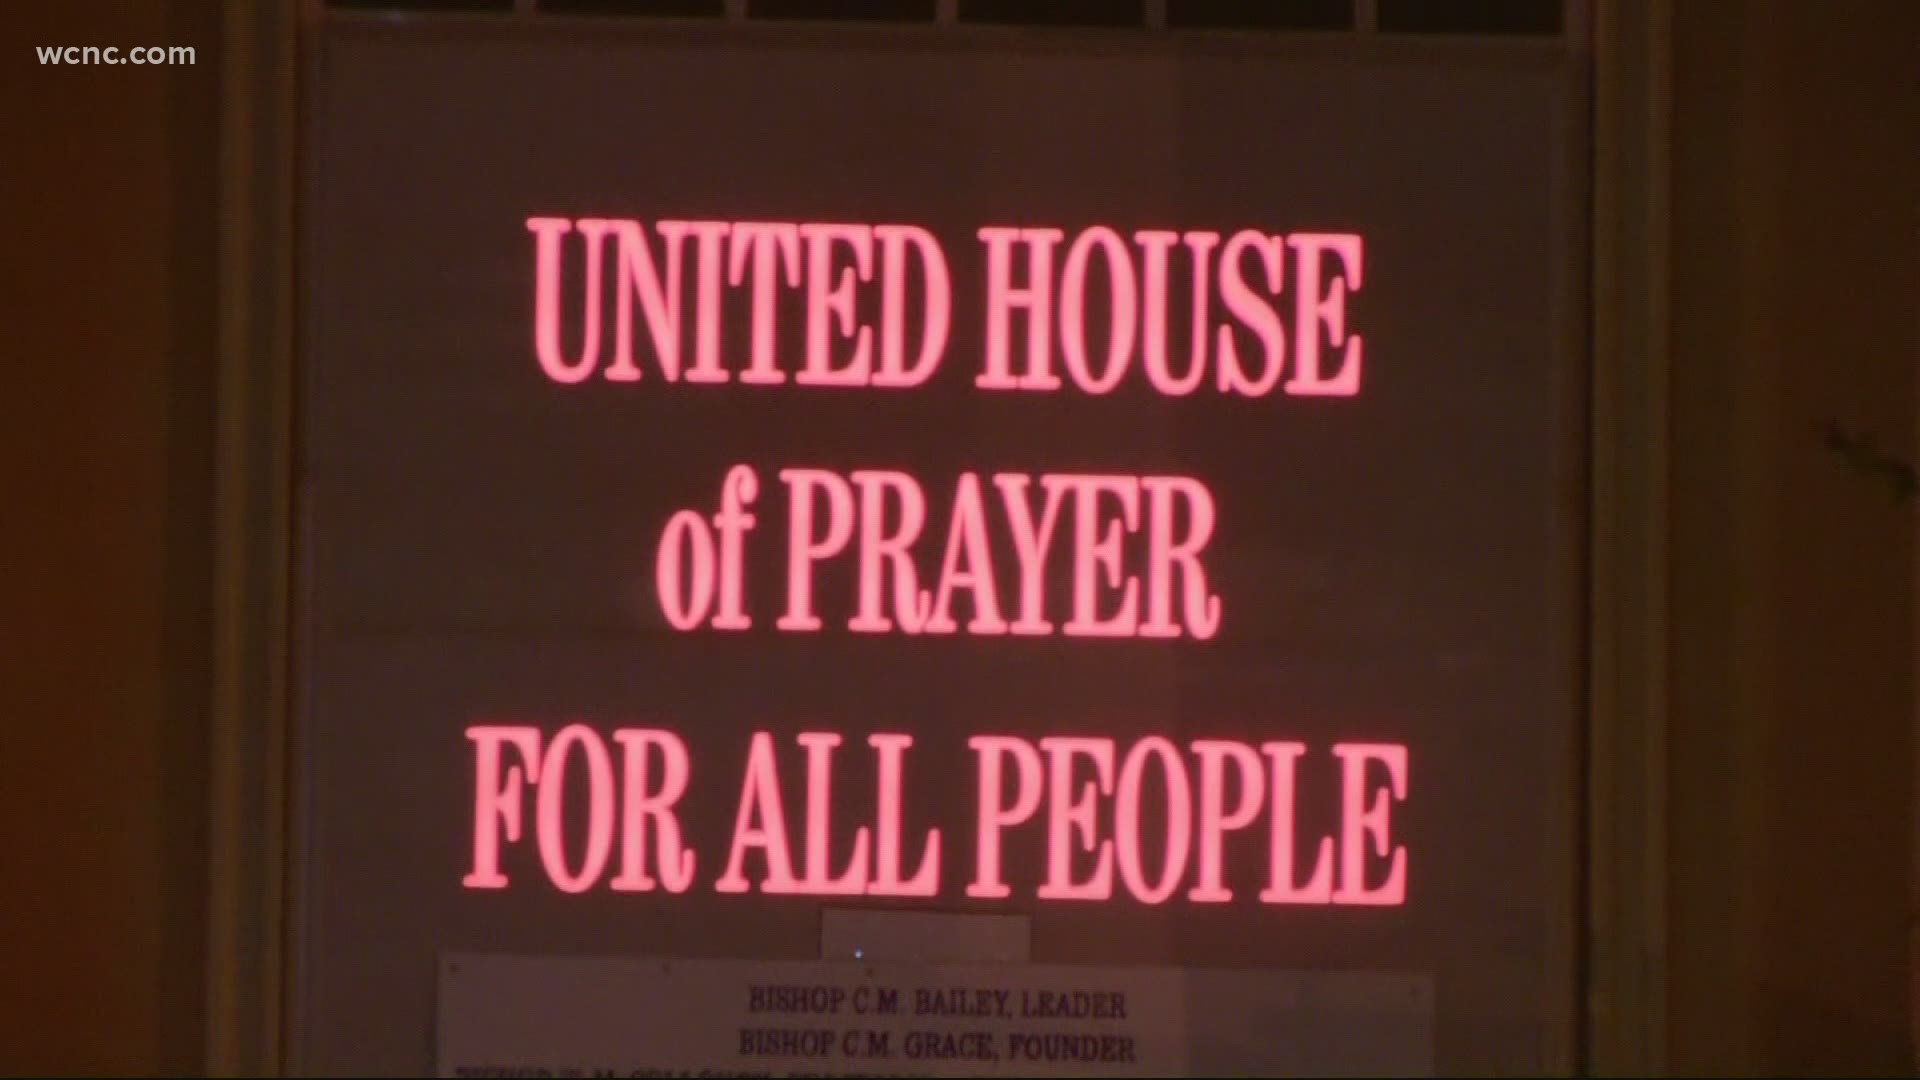 Mecklenburg County health officials have now confirmed 181 cases, six deaths and at least 10 hospitalizations linked to the United House of Prayer For All People.